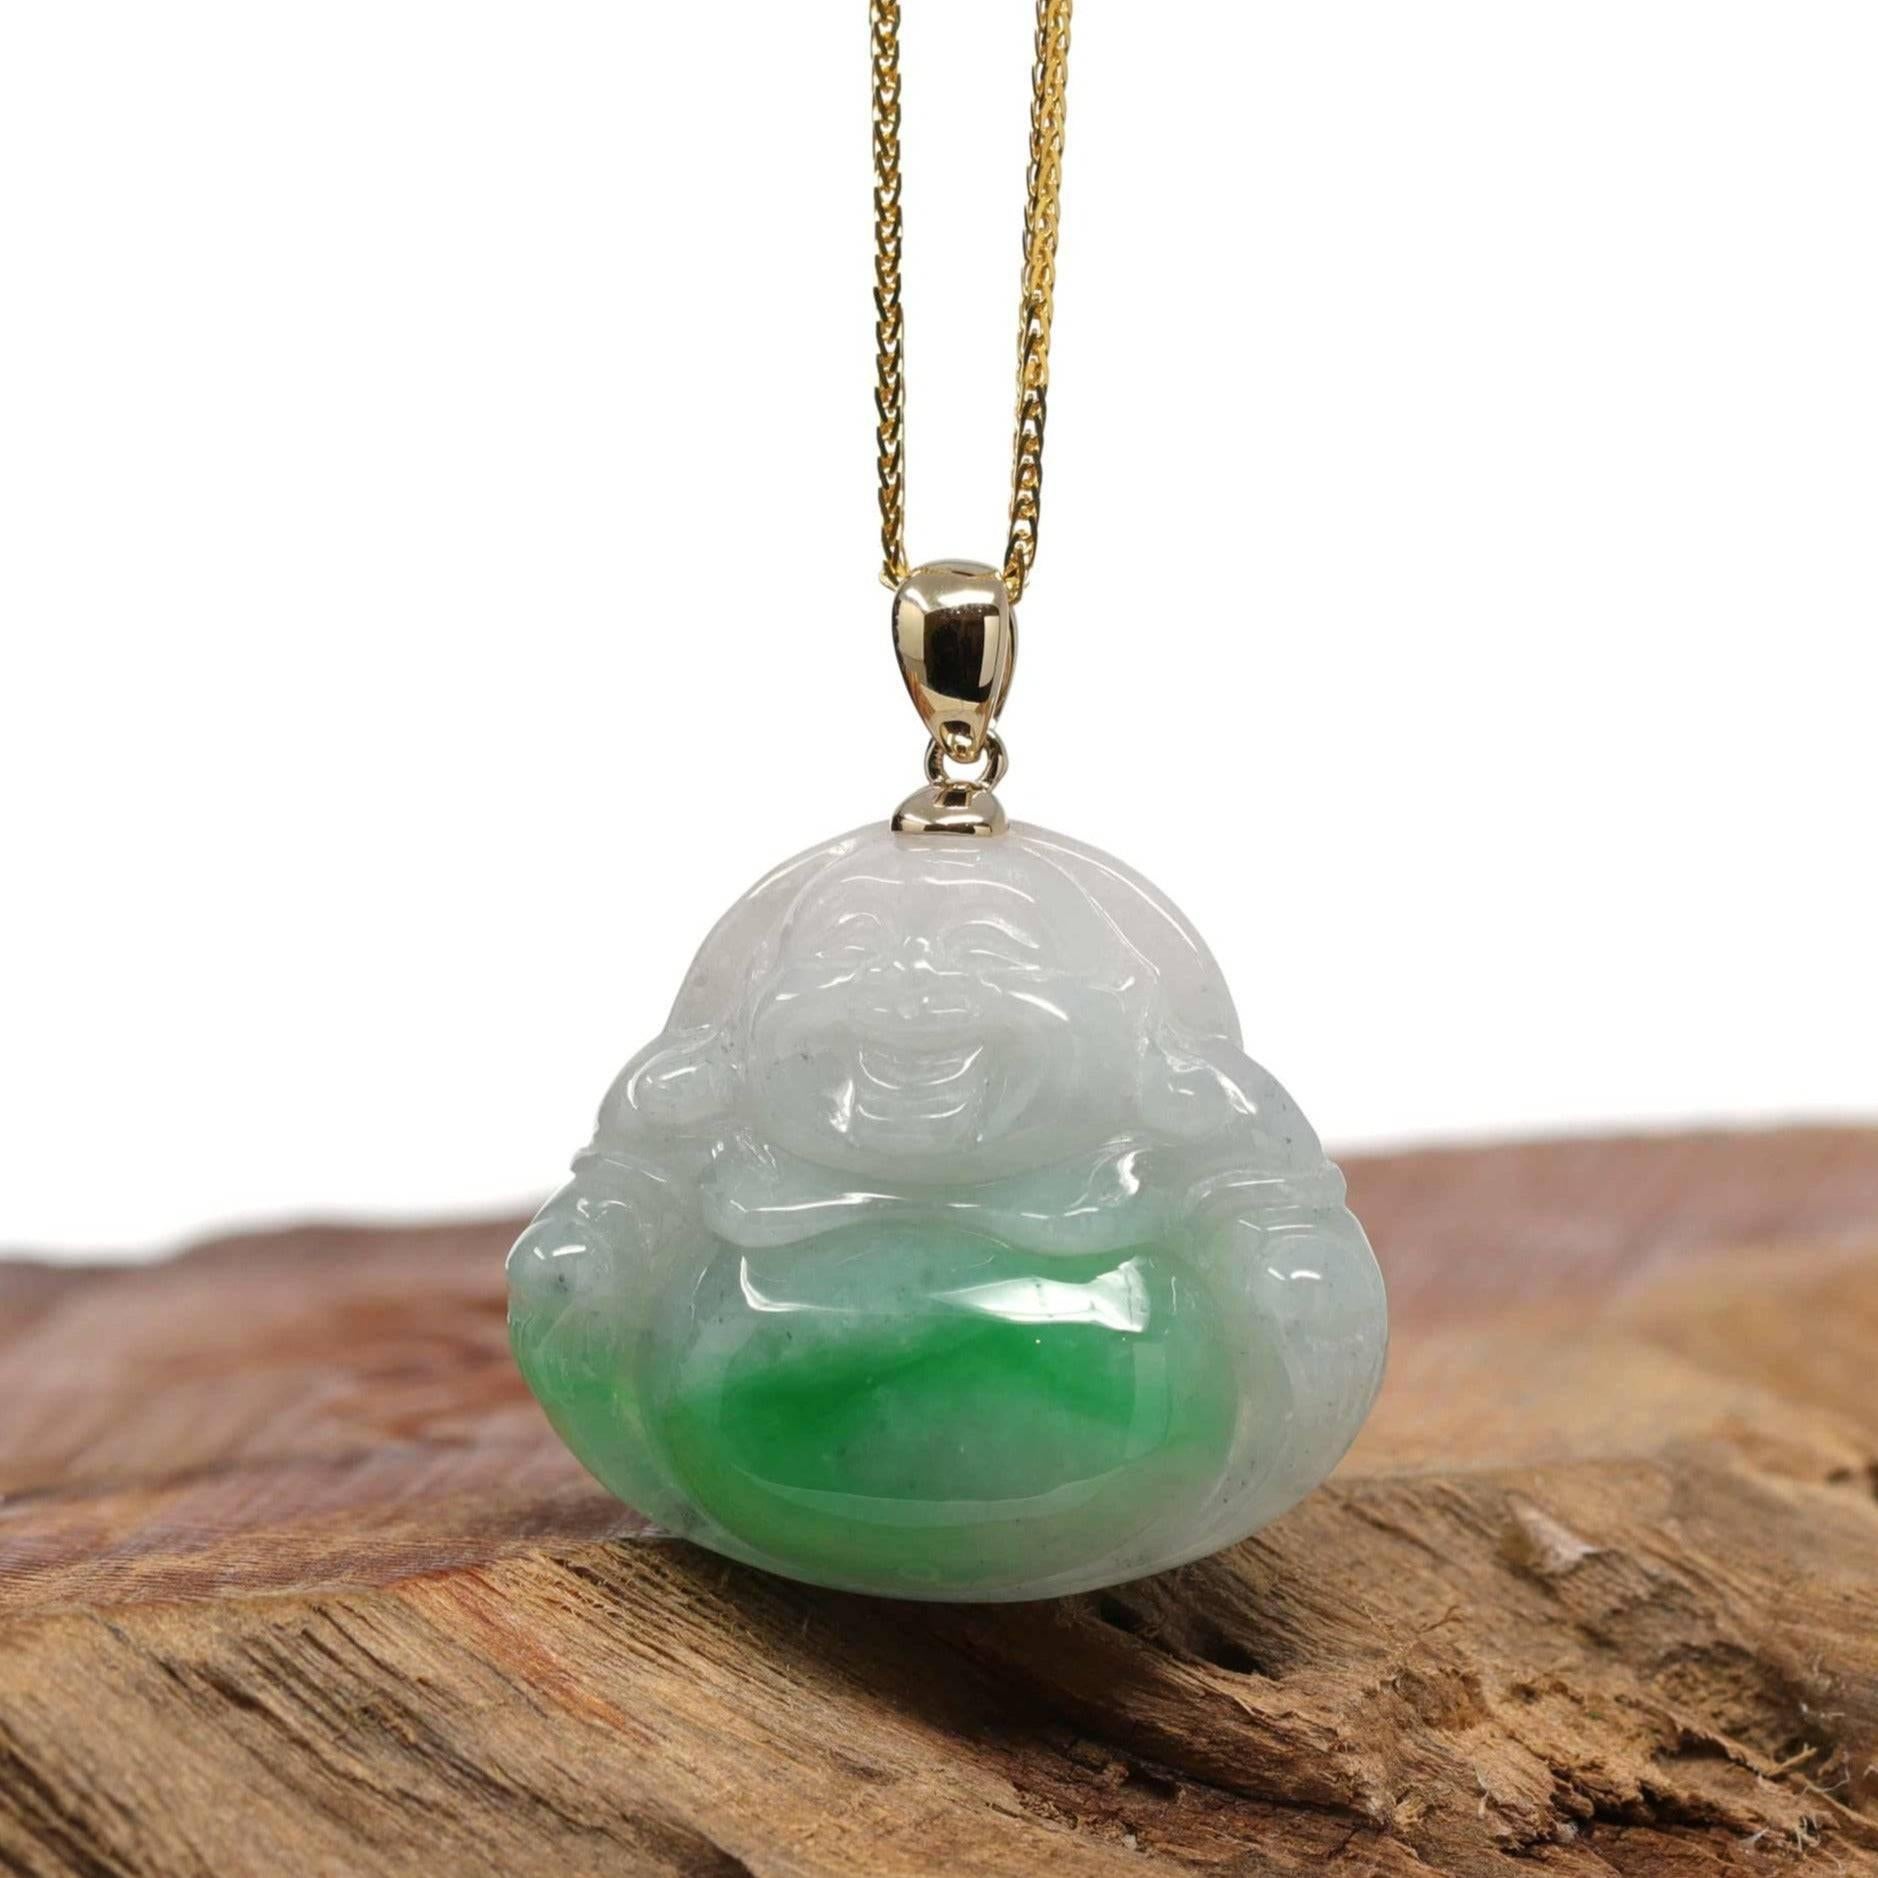 * Detail--- One-of-a-kind jadeite Buddha necklace, inspired by the figure of the traditional Buddha body. Combined with a simplistic, modern bail. The piece is more than perfect for daily wear. Wearing items bearing the image of Buddha can remind us